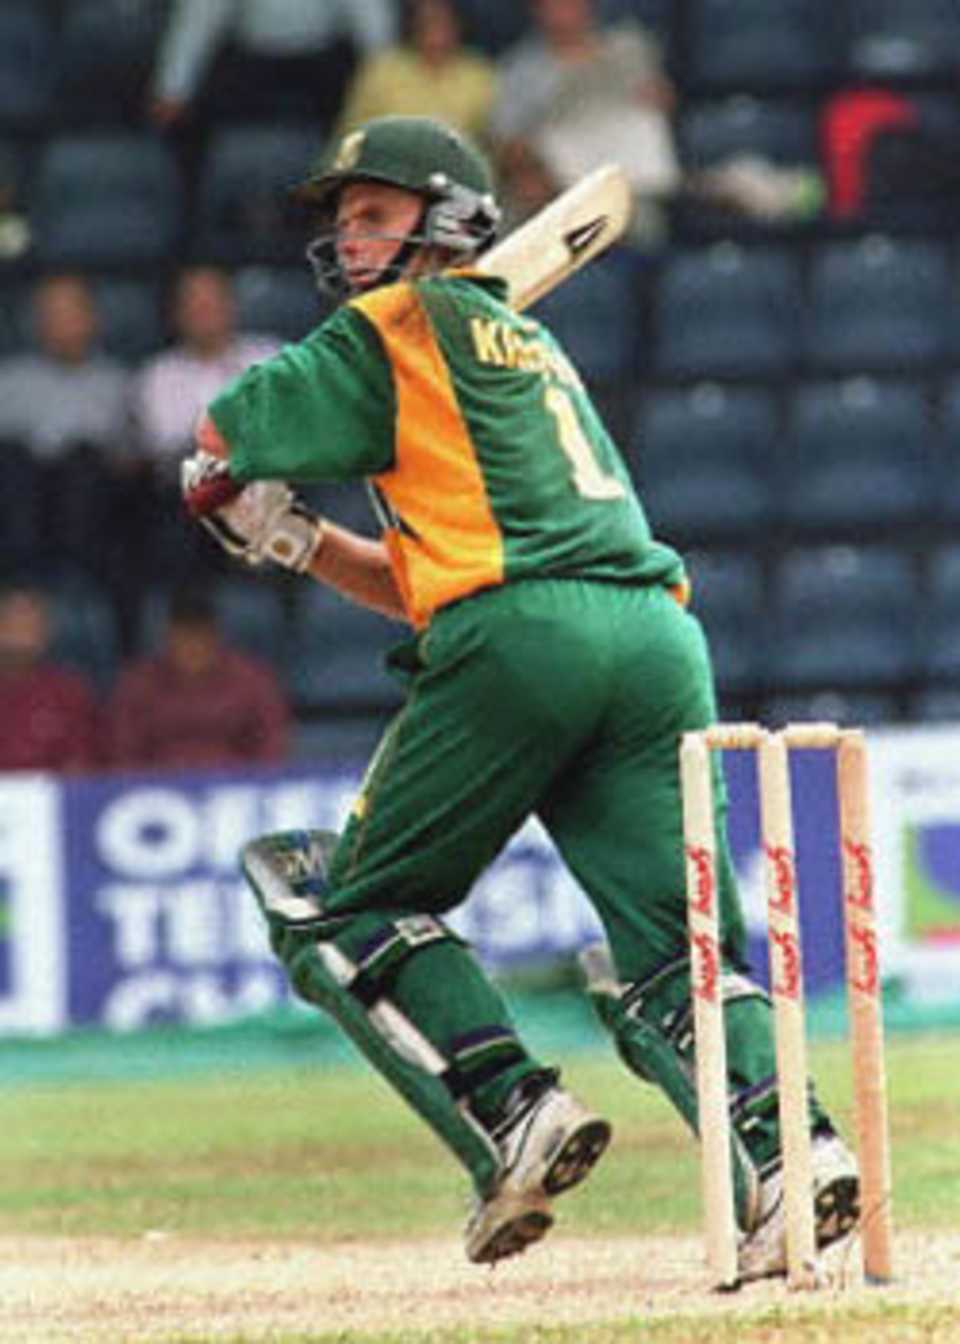 South African batsman Gary Kirsten dashes after a hit in his match against Pakistan during the Singapore Challenge 2000. Pakistan made 227 for nine off their 50 overs to beat South Africa by 22 runs. Godrej Singapore Challenge, 2000/01, 2nd Match, Pakistan v South Africa, Kallang Ground, Singapore 23 August 2000.